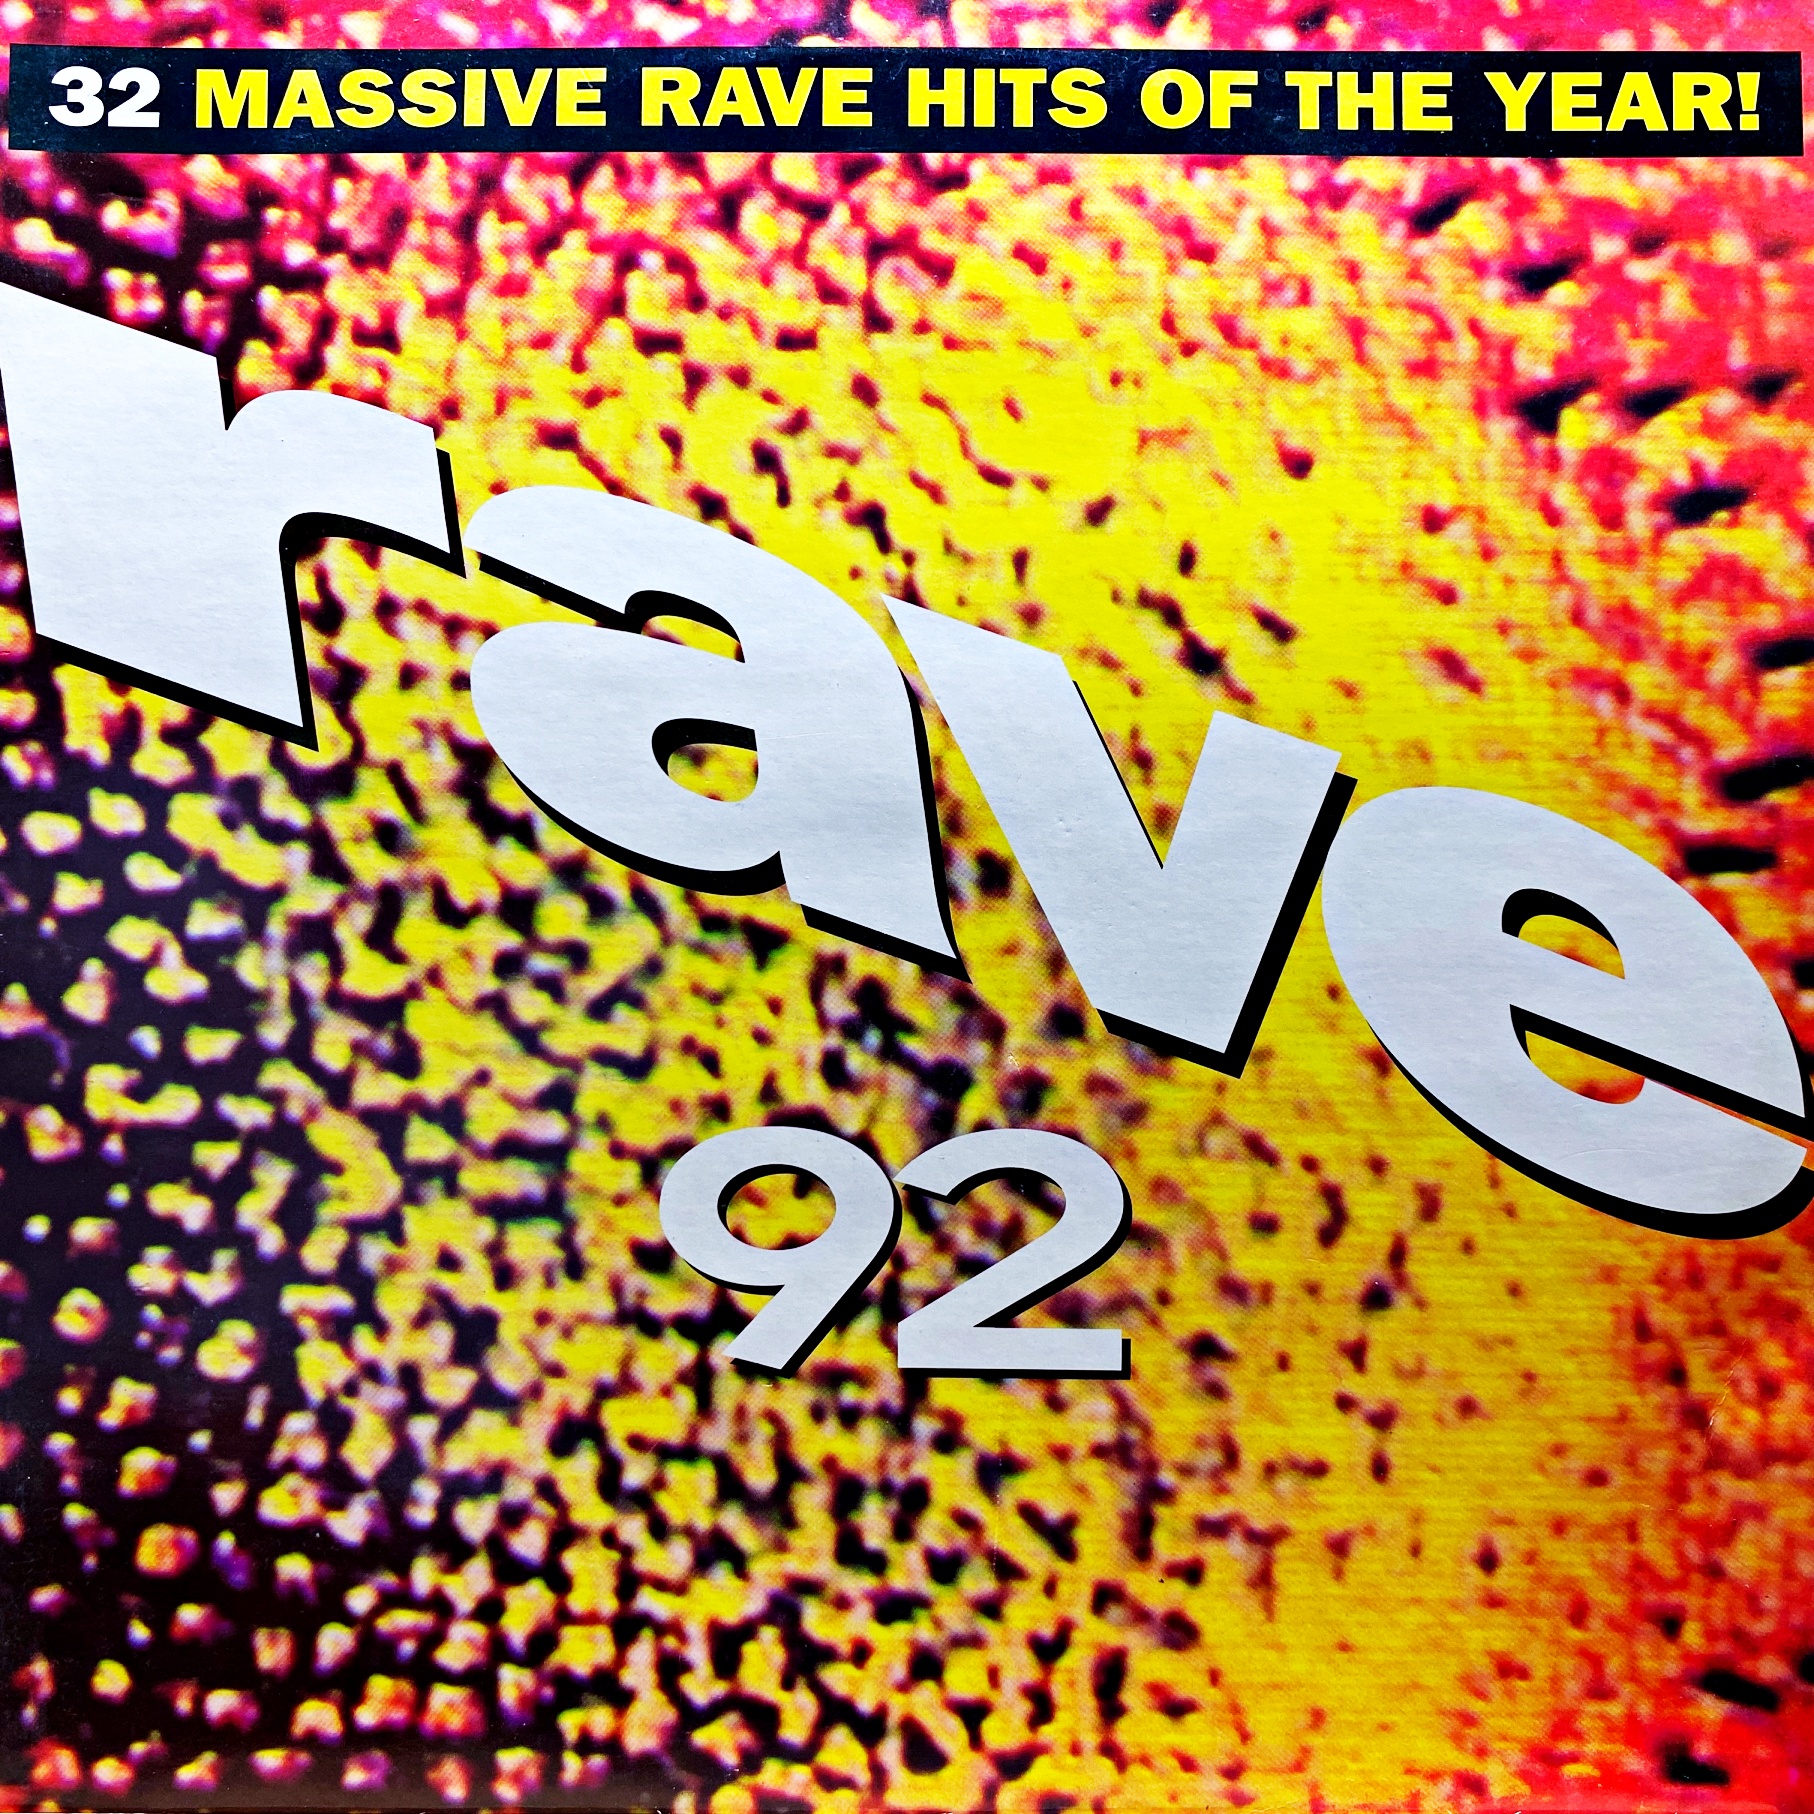 2xLP Various – Rave 92 - 32 Massive Rave Hits Of The Year